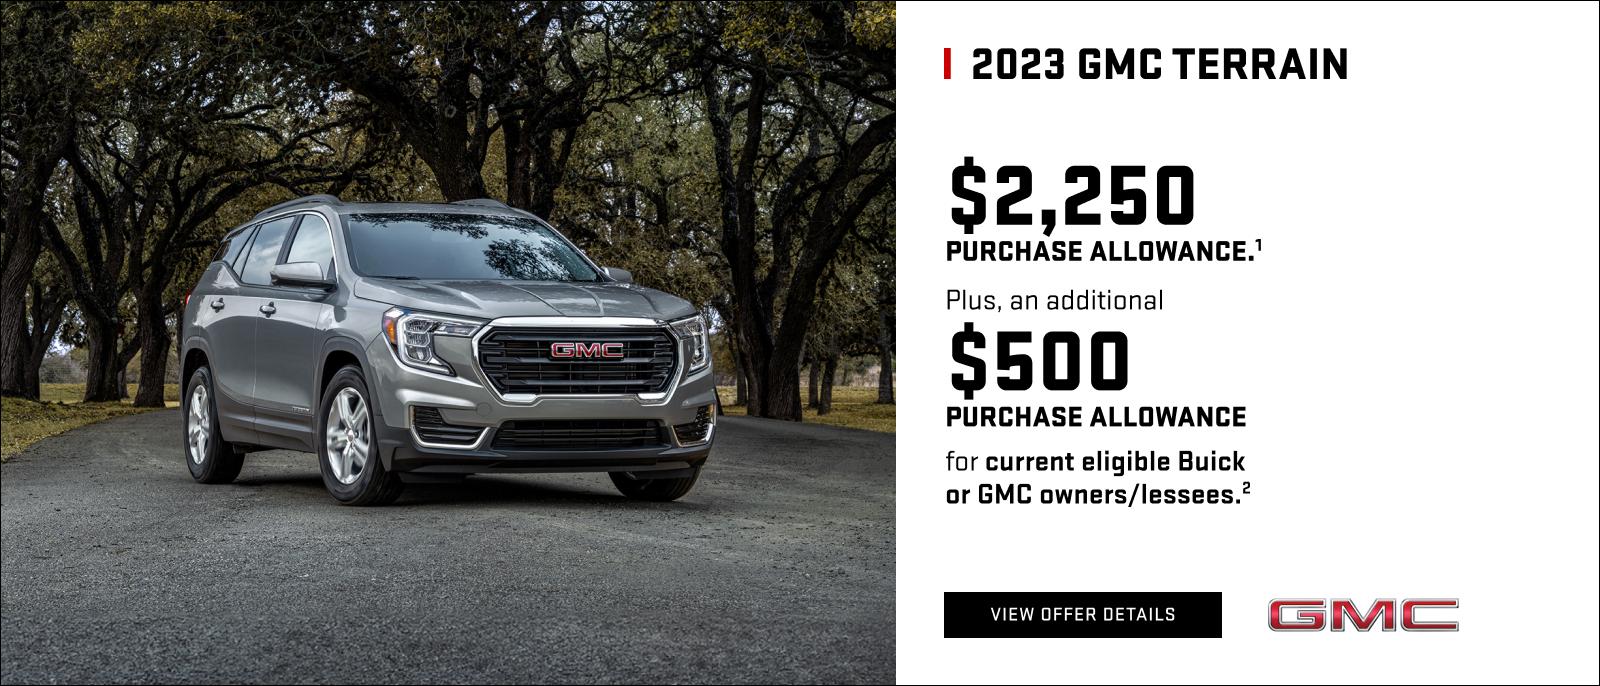 $2,250 PURCHASE ALLOWANCE.1

Plus, an additional $500 PURCHASE ALLOWANCE for current eligible Buick or GMC owners/lessees.2